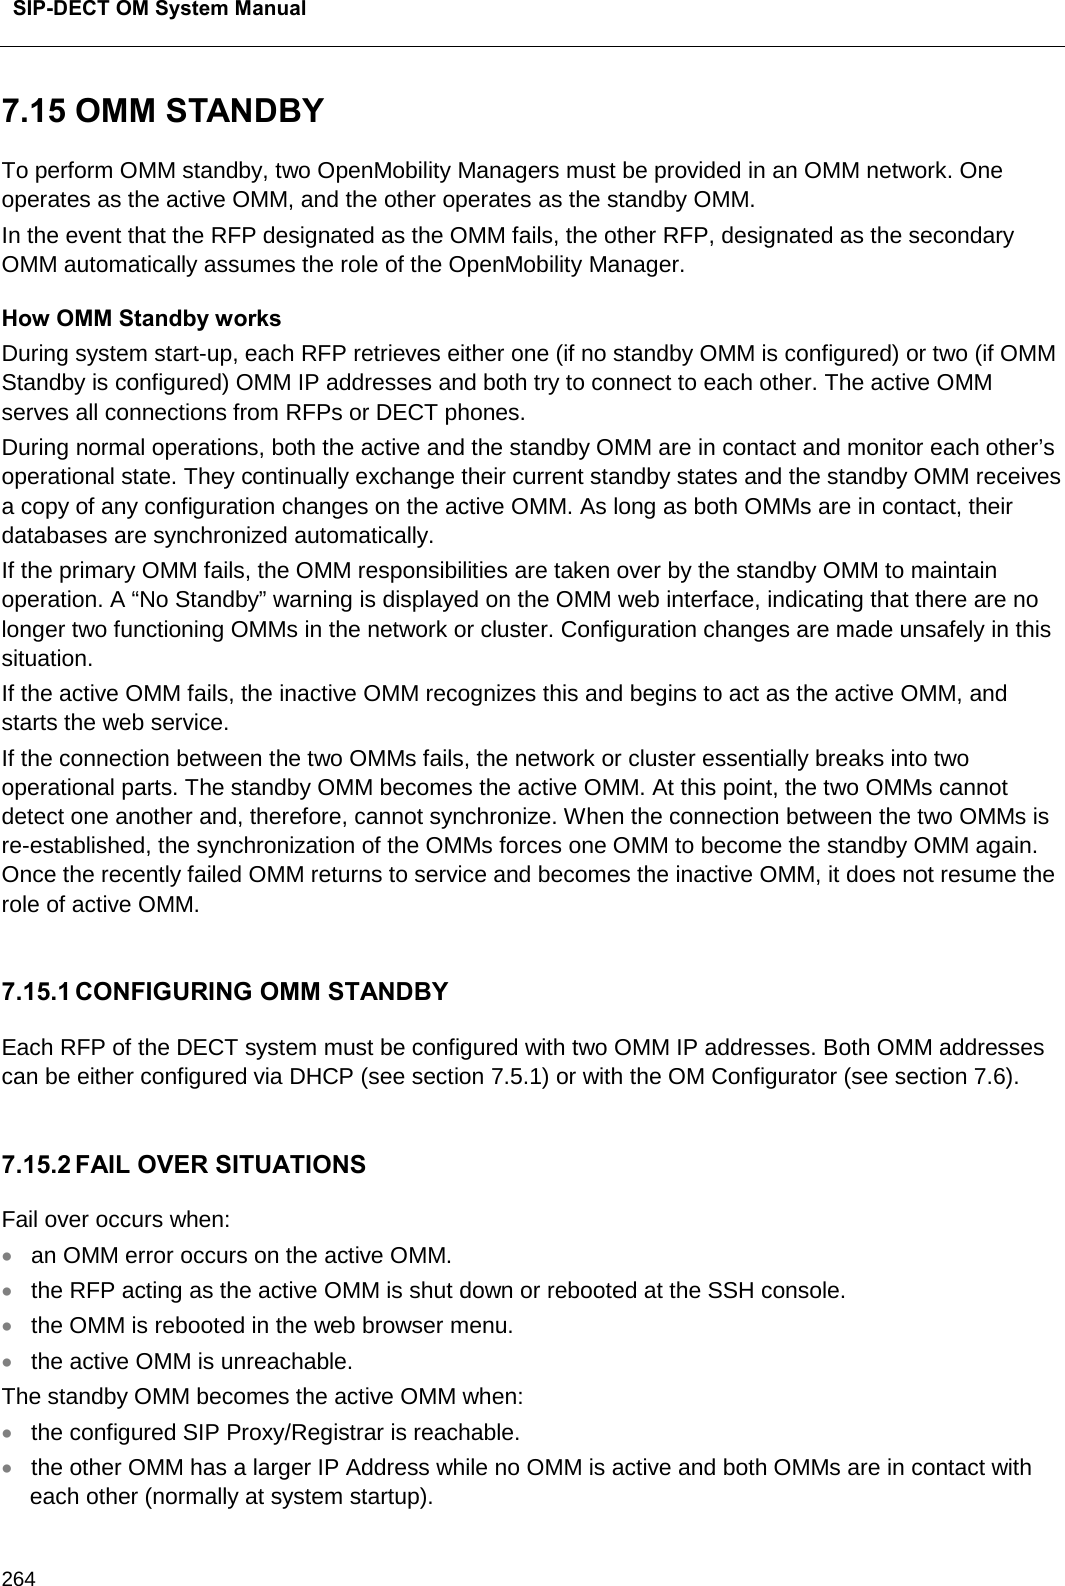  SIP-DECT OM System Manual    264 7.15 OMM STANDBY To perform OMM standby, two OpenMobility Managers must be provided in an OMM network. One operates as the active OMM, and the other operates as the standby OMM.  In the event that the RFP designated as the OMM fails, the other RFP, designated as the secondary OMM automatically assumes the role of the OpenMobility Manager. How OMM Standby works During system start-up, each RFP retrieves either one (if no standby OMM is configured) or two (if OMM Standby is configured) OMM IP addresses and both try to connect to each other. The active OMM serves all connections from RFPs or DECT phones. During normal operations, both the active and the standby OMM are in contact and monitor each other’s operational state. They continually exchange their current standby states and the standby OMM receives a copy of any configuration changes on the active OMM. As long as both OMMs are in contact, their databases are synchronized automatically. If the primary OMM fails, the OMM responsibilities are taken over by the standby OMM to maintain operation. A “No Standby” warning is displayed on the OMM web interface, indicating that there are no longer two functioning OMMs in the network or cluster. Configuration changes are made unsafely in this situation. If the active OMM fails, the inactive OMM recognizes this and begins to act as the active OMM, and starts the web service.  If the connection between the two OMMs fails, the network or cluster essentially breaks into two operational parts. The standby OMM becomes the active OMM. At this point, the two OMMs cannot detect one another and, therefore, cannot synchronize. When the connection between the two OMMs is re-established, the synchronization of the OMMs forces one OMM to become the standby OMM again. Once the recently failed OMM returns to service and becomes the inactive OMM, it does not resume the role of active OMM.  7.15.1 CONFIGURING OMM STANDBY Each RFP of the DECT system must be configured with two OMM IP addresses. Both OMM addresses can be either configured via DHCP (see section 7.5.1) or with the OM Configurator (see section 7.6).  7.15.2 FAIL OVER SITUATIONS Fail over occurs when: • an OMM error occurs on the active OMM. • the RFP acting as the active OMM is shut down or rebooted at the SSH console. • the OMM is rebooted in the web browser menu. • the active OMM is unreachable. The standby OMM becomes the active OMM when:  • the configured SIP Proxy/Registrar is reachable. • the other OMM has a larger IP Address while no OMM is active and both OMMs are in contact with each other (normally at system startup). 